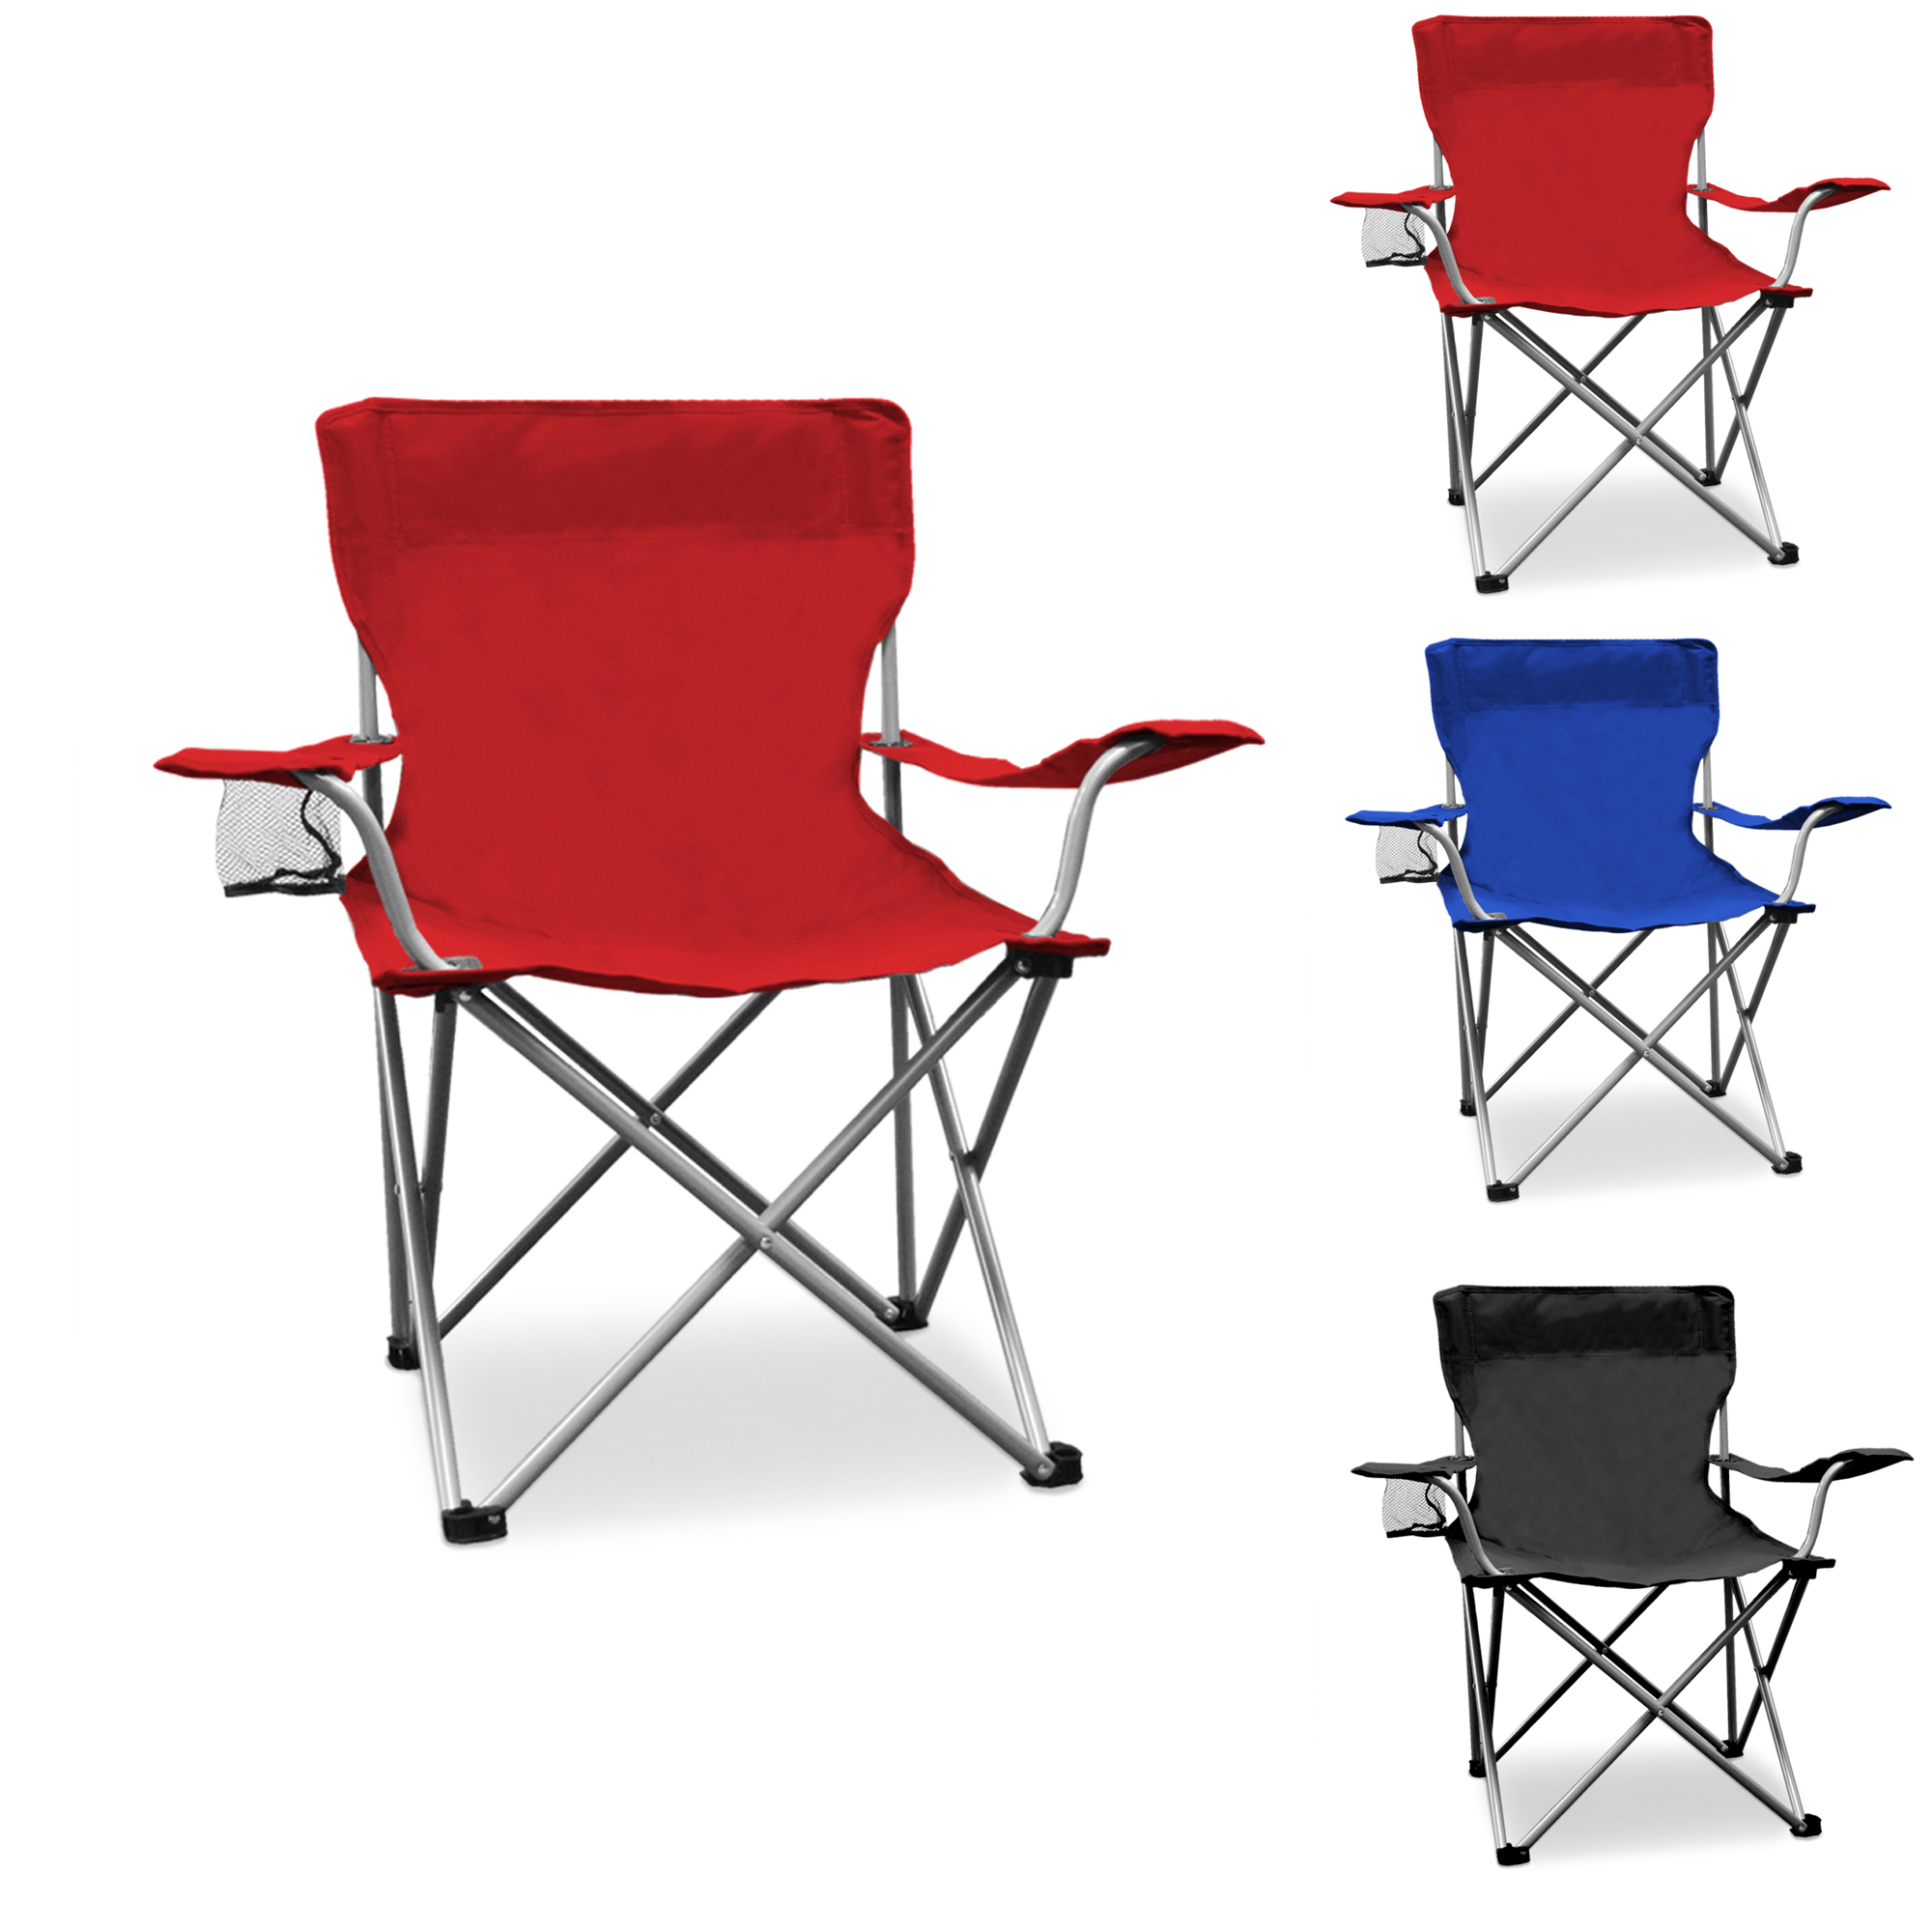 Portable Tailgate CHAIRs w/ Armrests & Cup Holder - Choose Your Color(s)